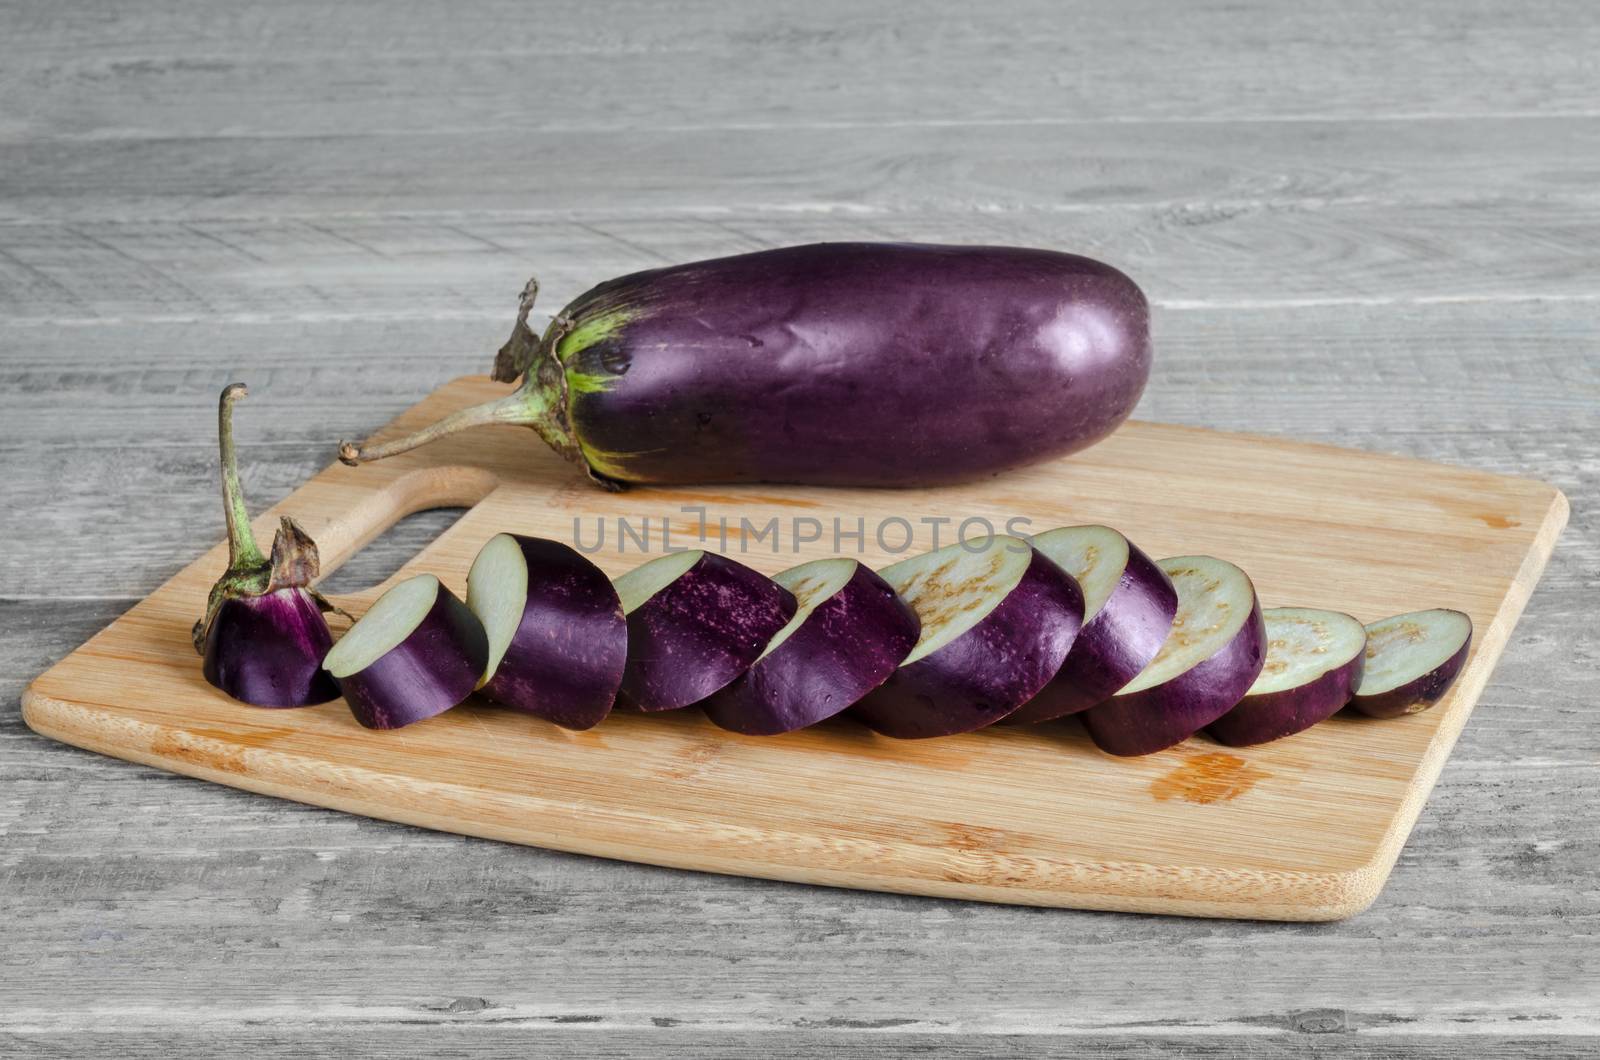 Eggplant lay on a cutting Board, sliced and whole. by Gaina